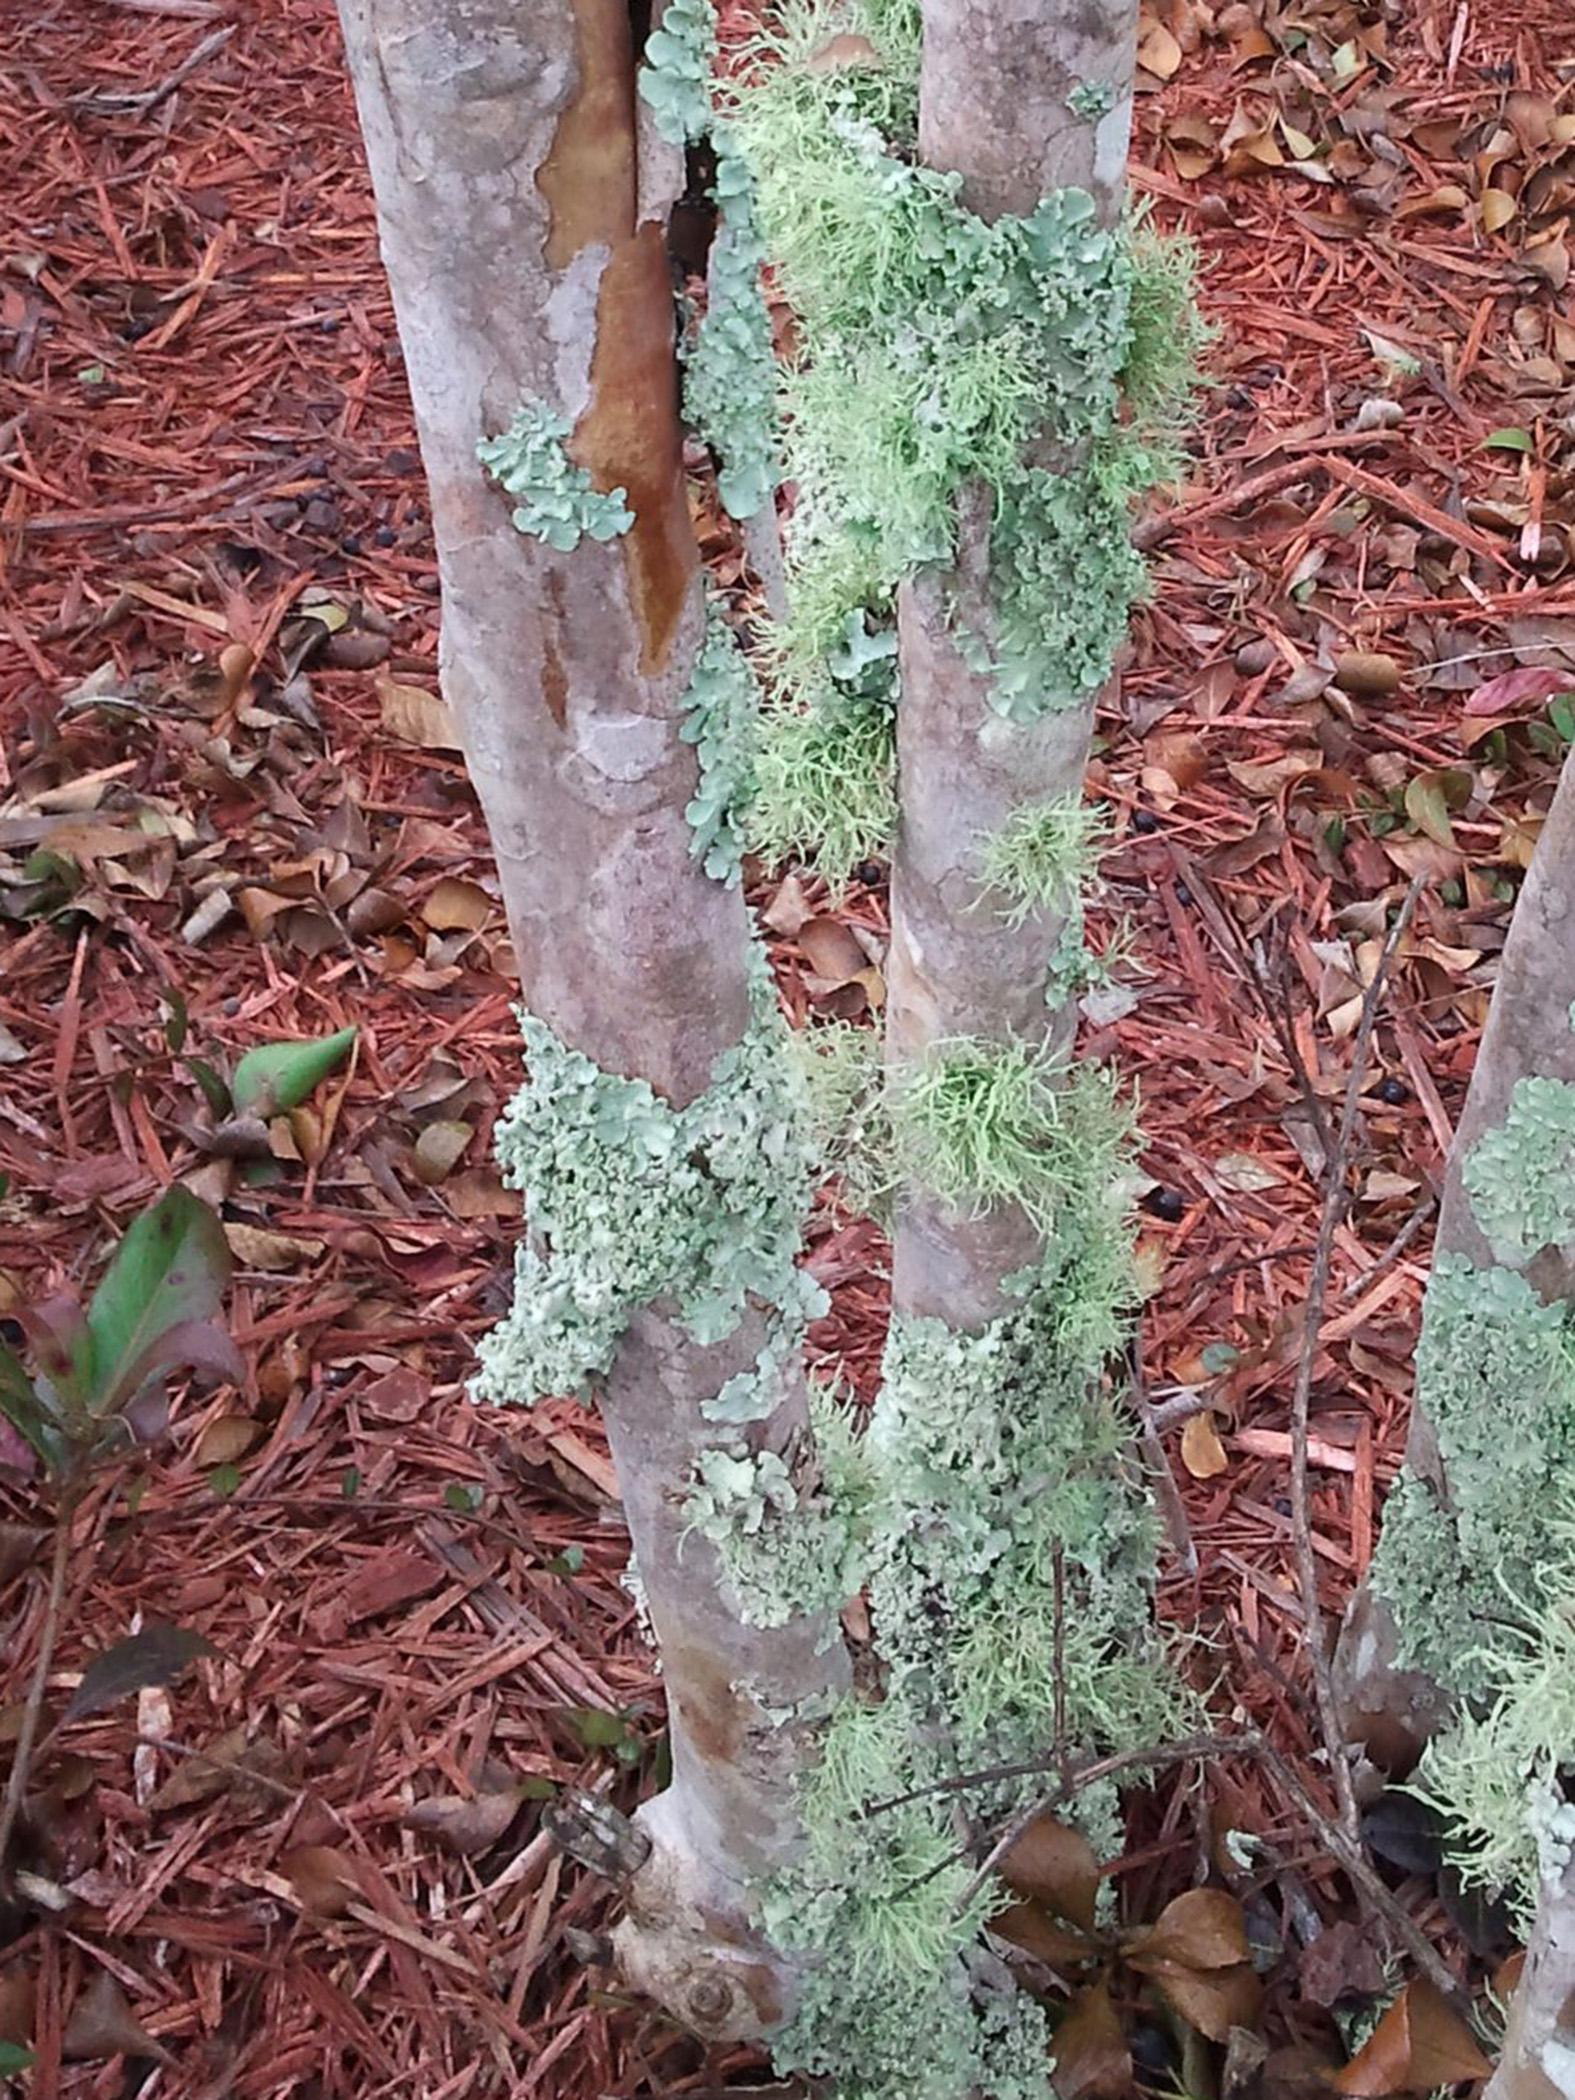 Lichens are an unlikely combination of fungi and algae that survive in a symbiotic relationship. They do not harm the plants on which they grow. Three main types of lichen are found on the bark of woody plants and on rocks and other hard surfaces. (Photo by MSU Extension Service/Gary Bachman)